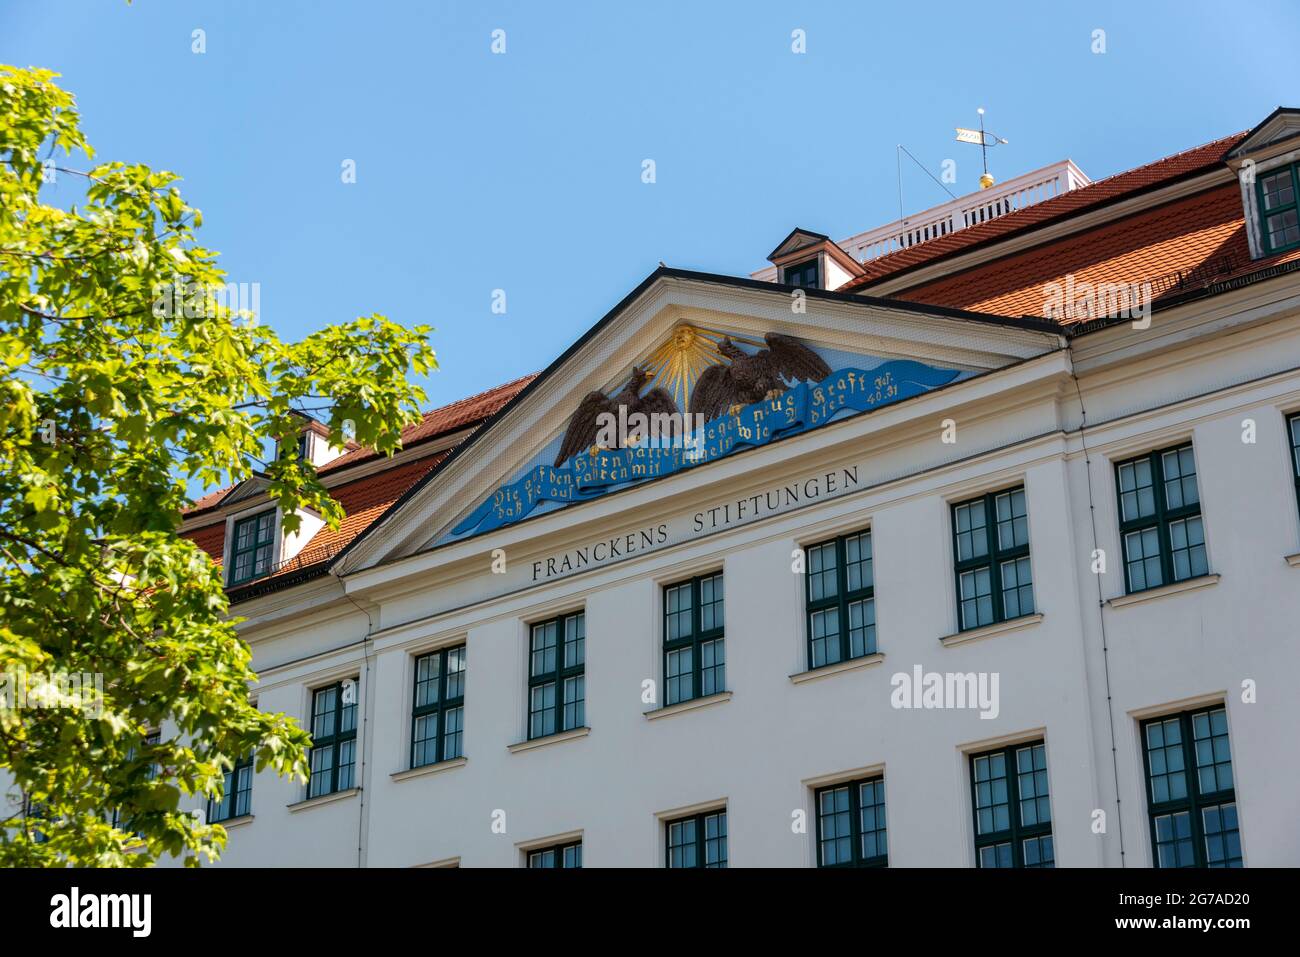 Germany, Saxony-Anhalt, Halle, Francke Foundations, founded by August Hermann Francke, German Protestant theologian, pedagogue and hymn poet, one of the main exponents of Pietism. Stock Photo